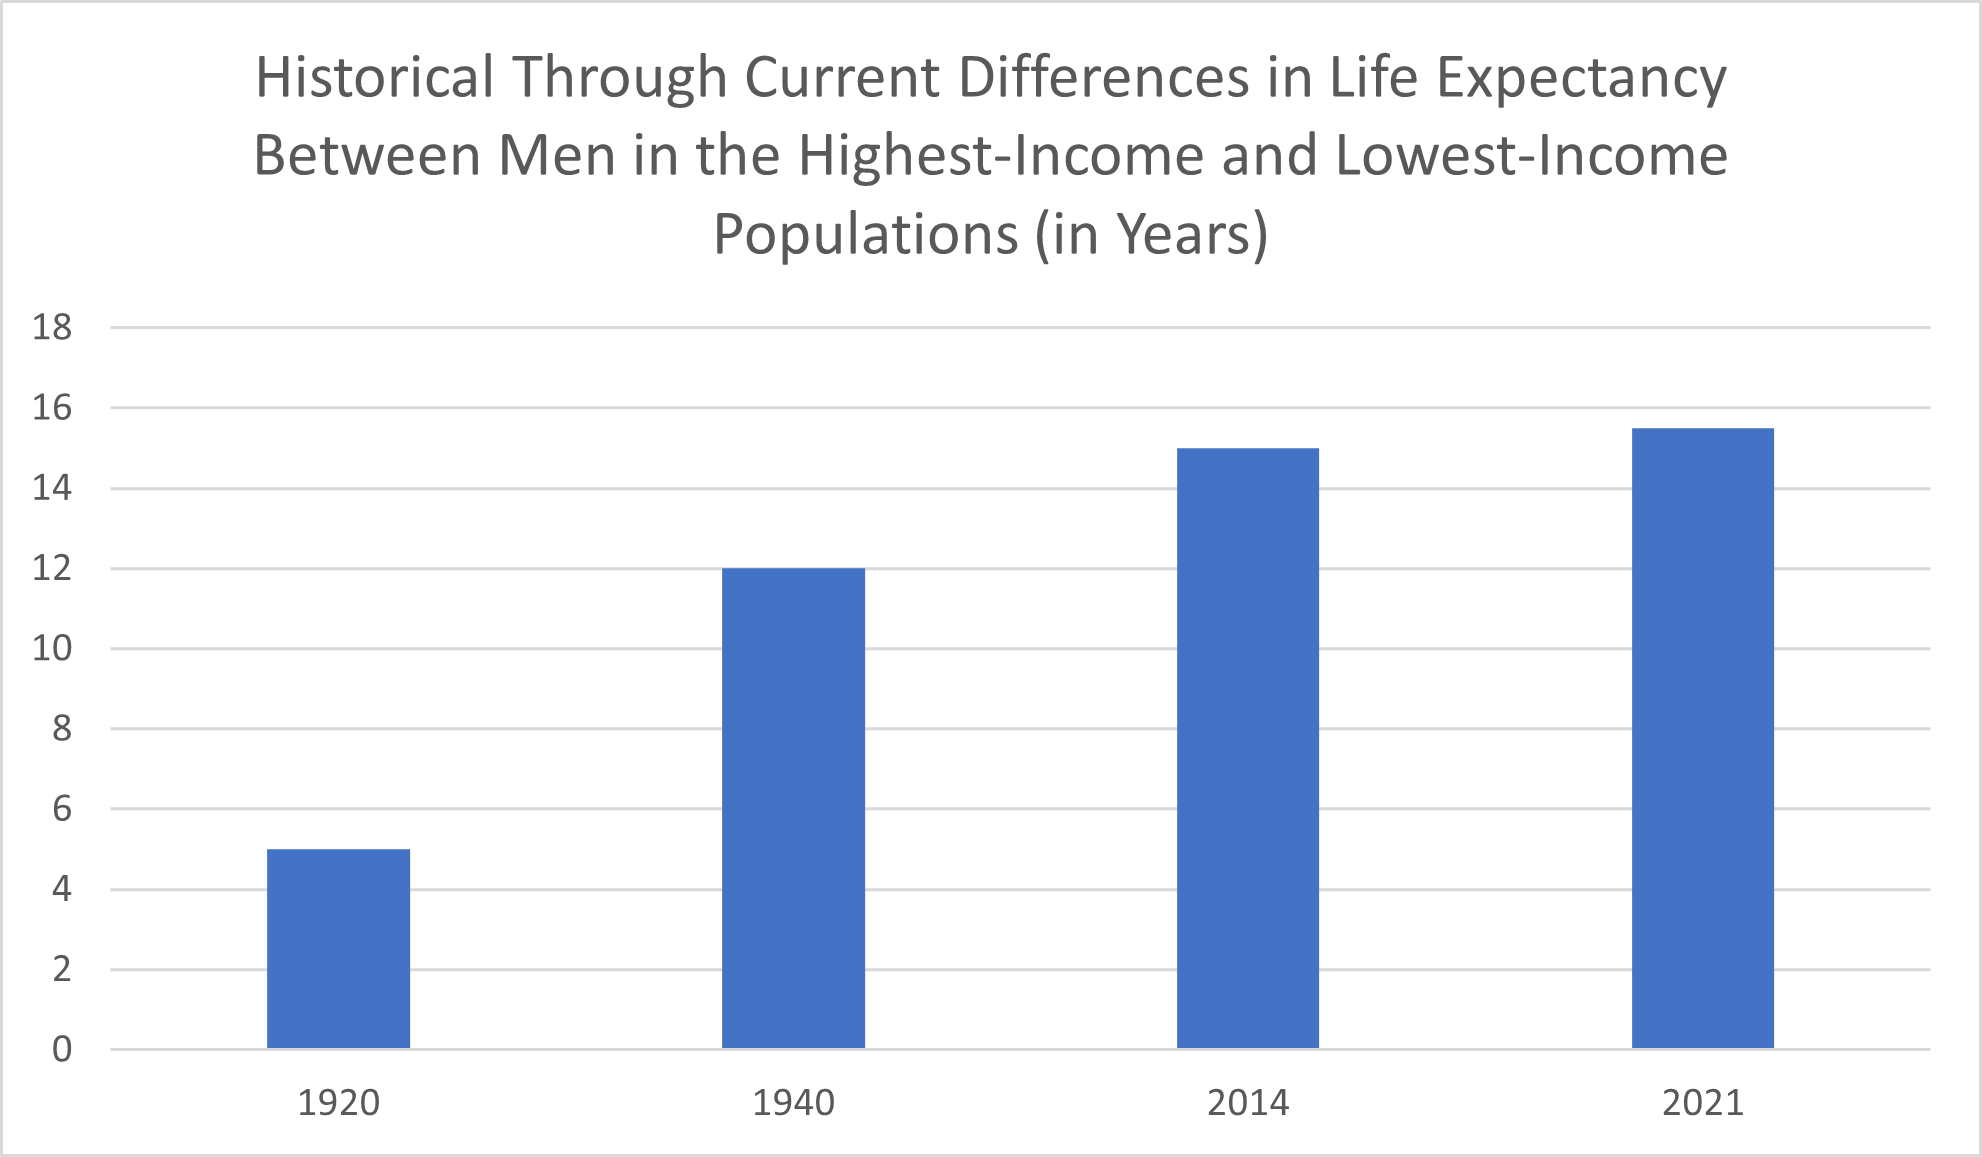 Historical Through Current Differences in Life Expectancy Between Men in the Highest-Income and Lowest-Income Populations (in Years)